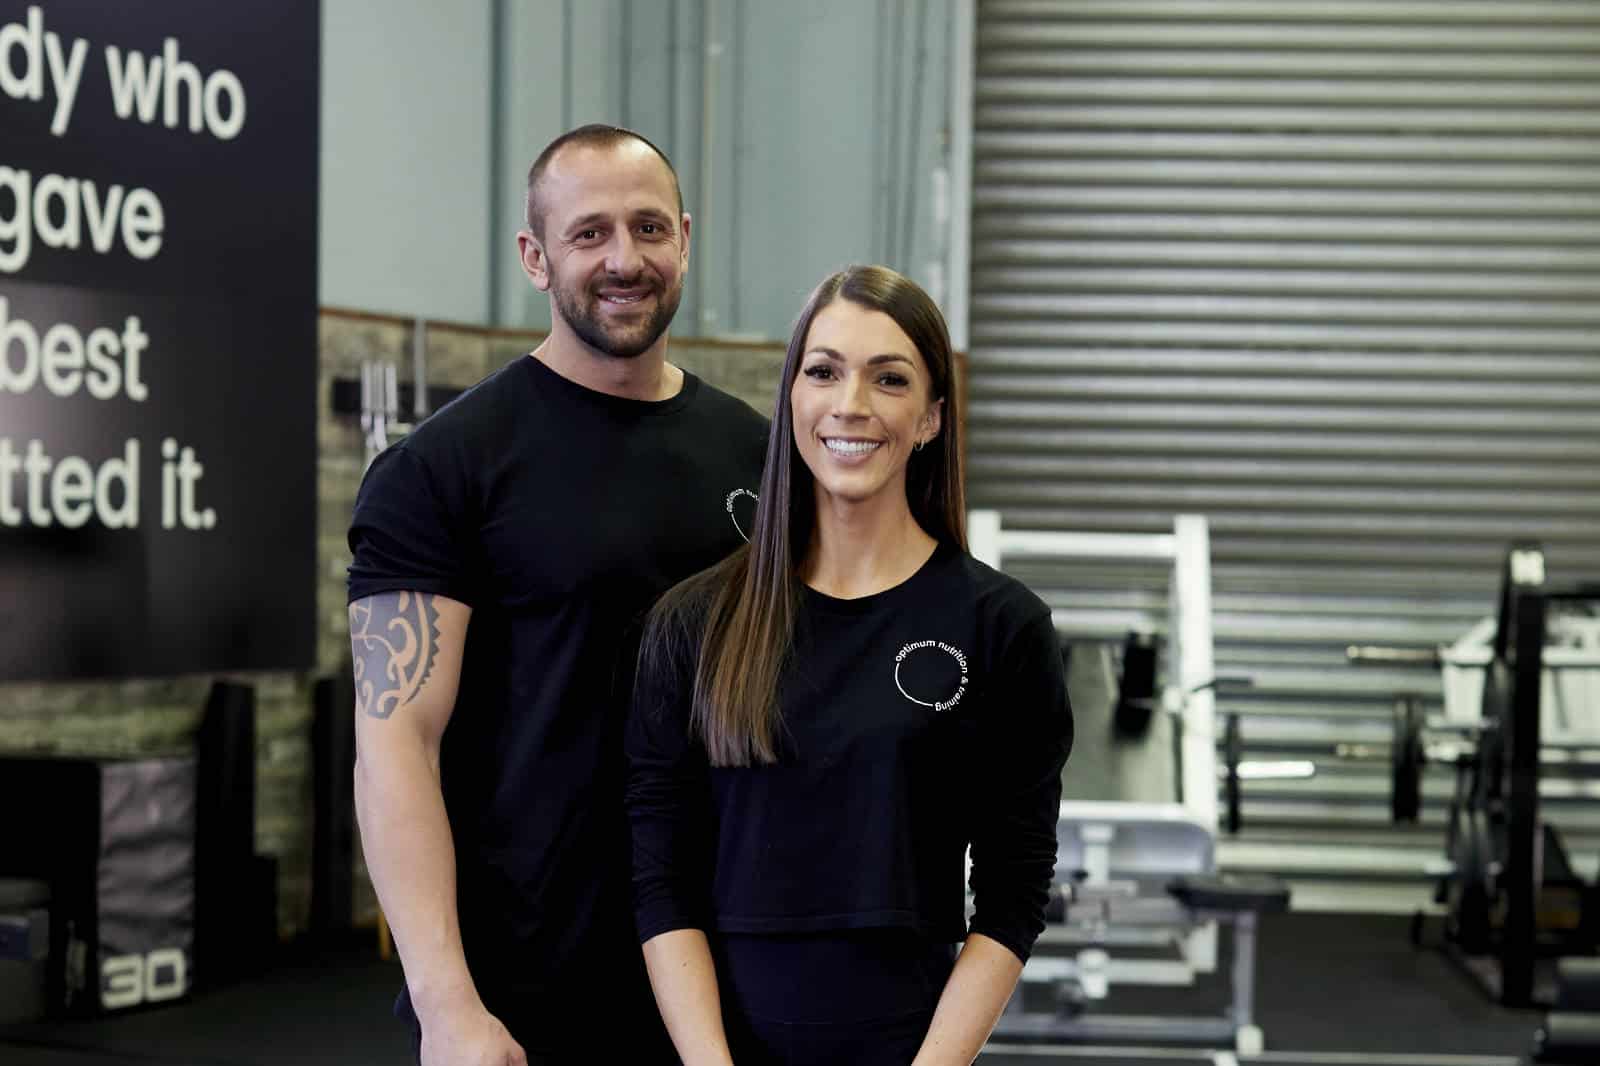 Directors Maeve and Michael standing together in front of some gym equipment